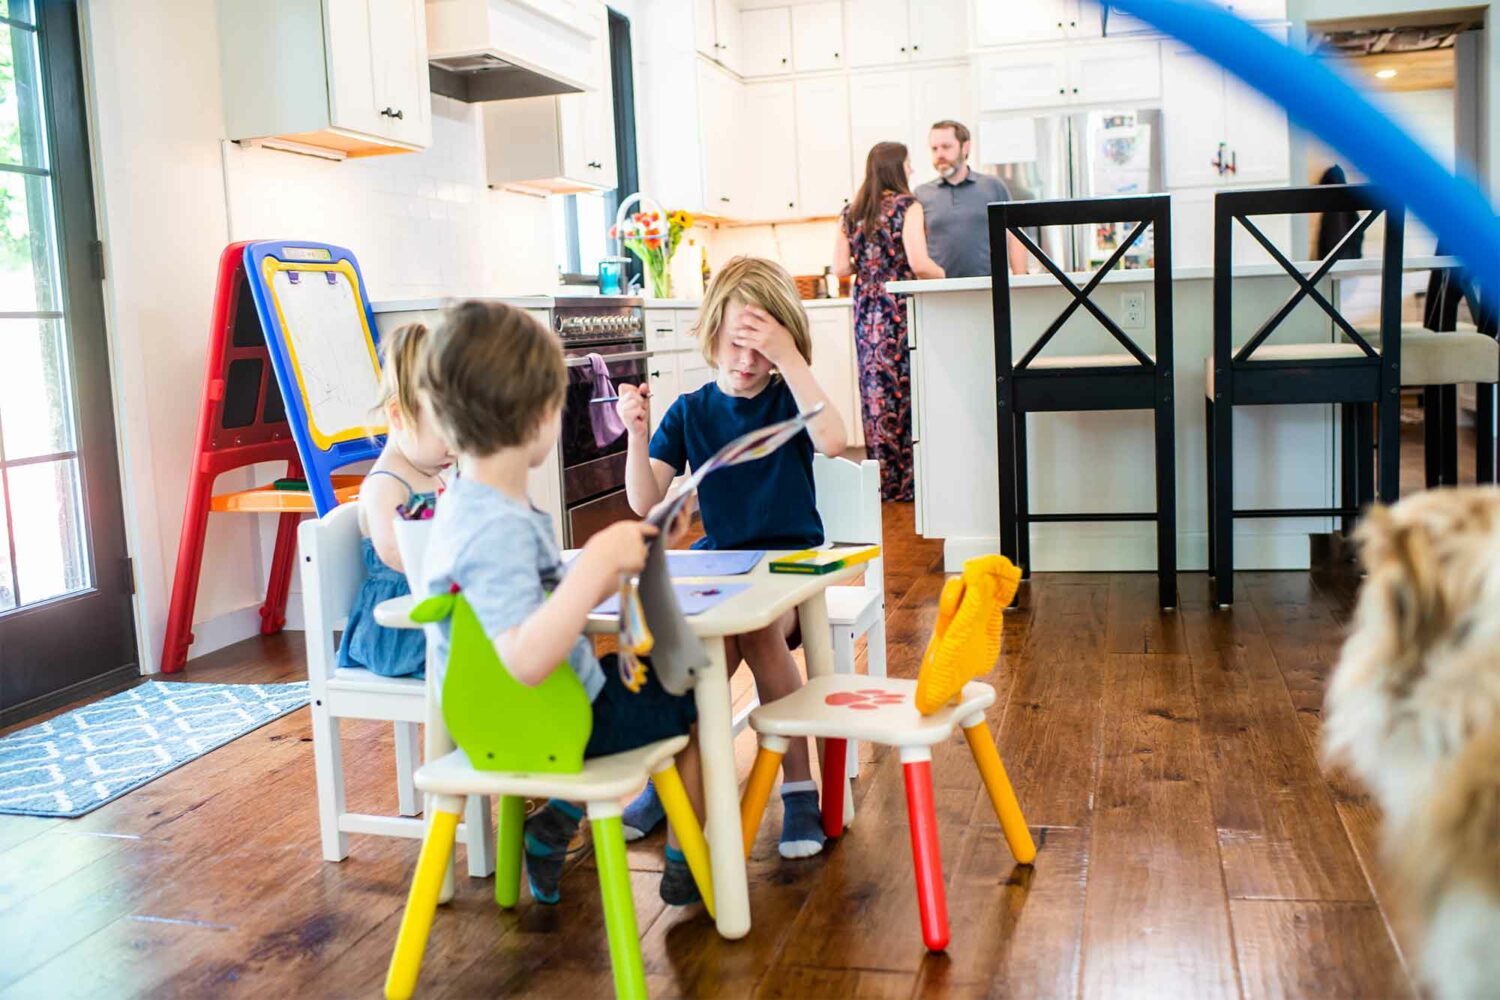 3 children playing or drawing at a kids table while parents talk behind them in the kitchen.